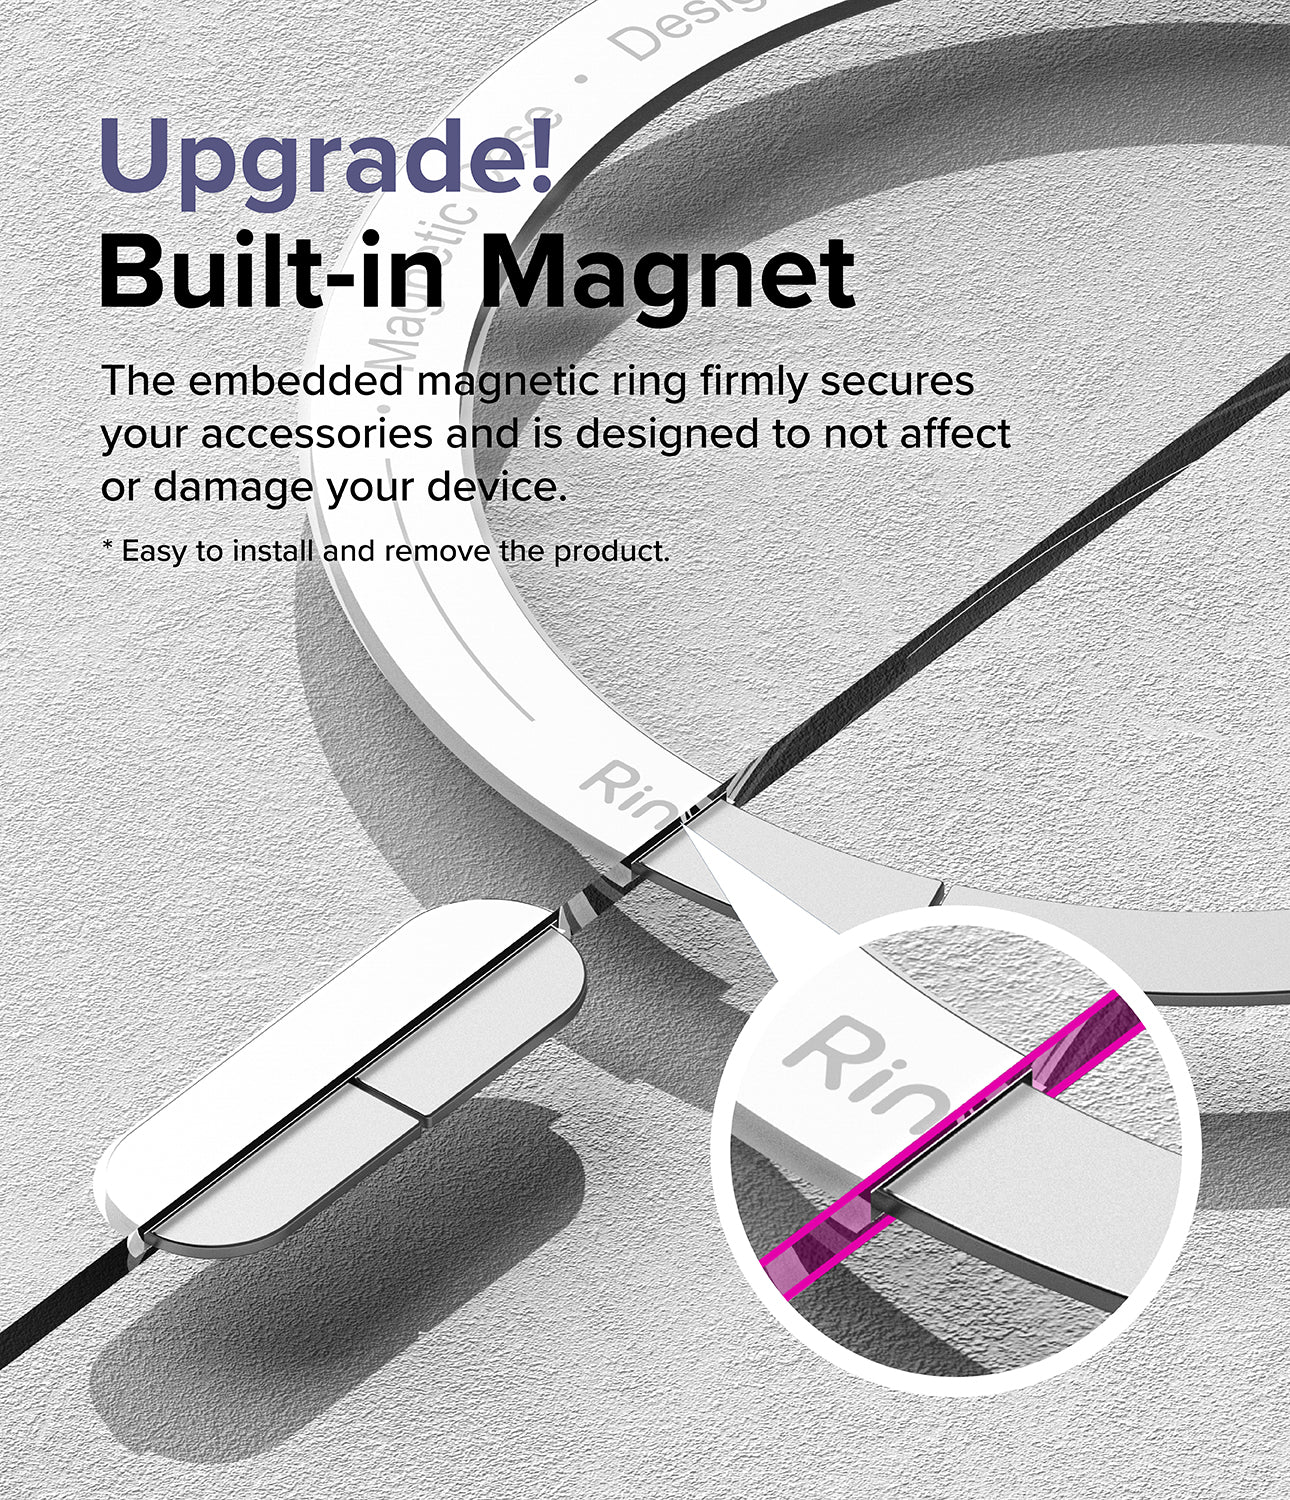 Galaxy S24 Case | Fusion Magnetic - Upgrade! Built-in Magnet. The embedded magnetic ring firmly secures your accessories and is designed to not affect or damage your device.